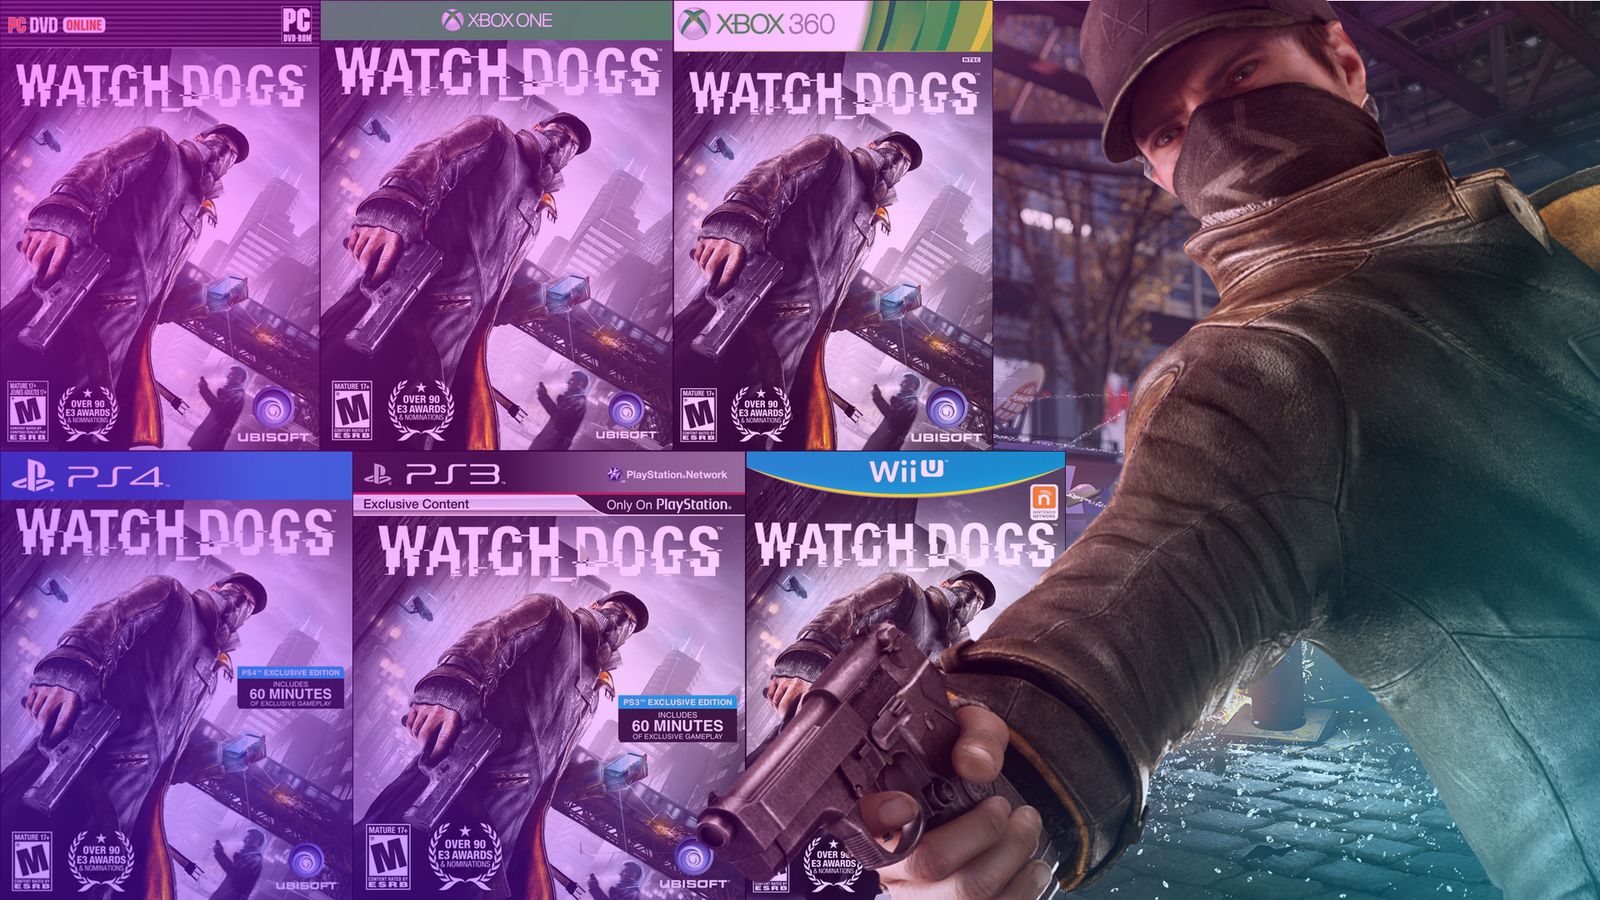 Térmico otro semáforo Watch Dogs special editions total $1,240, but do you really need that hat?  - Polygon